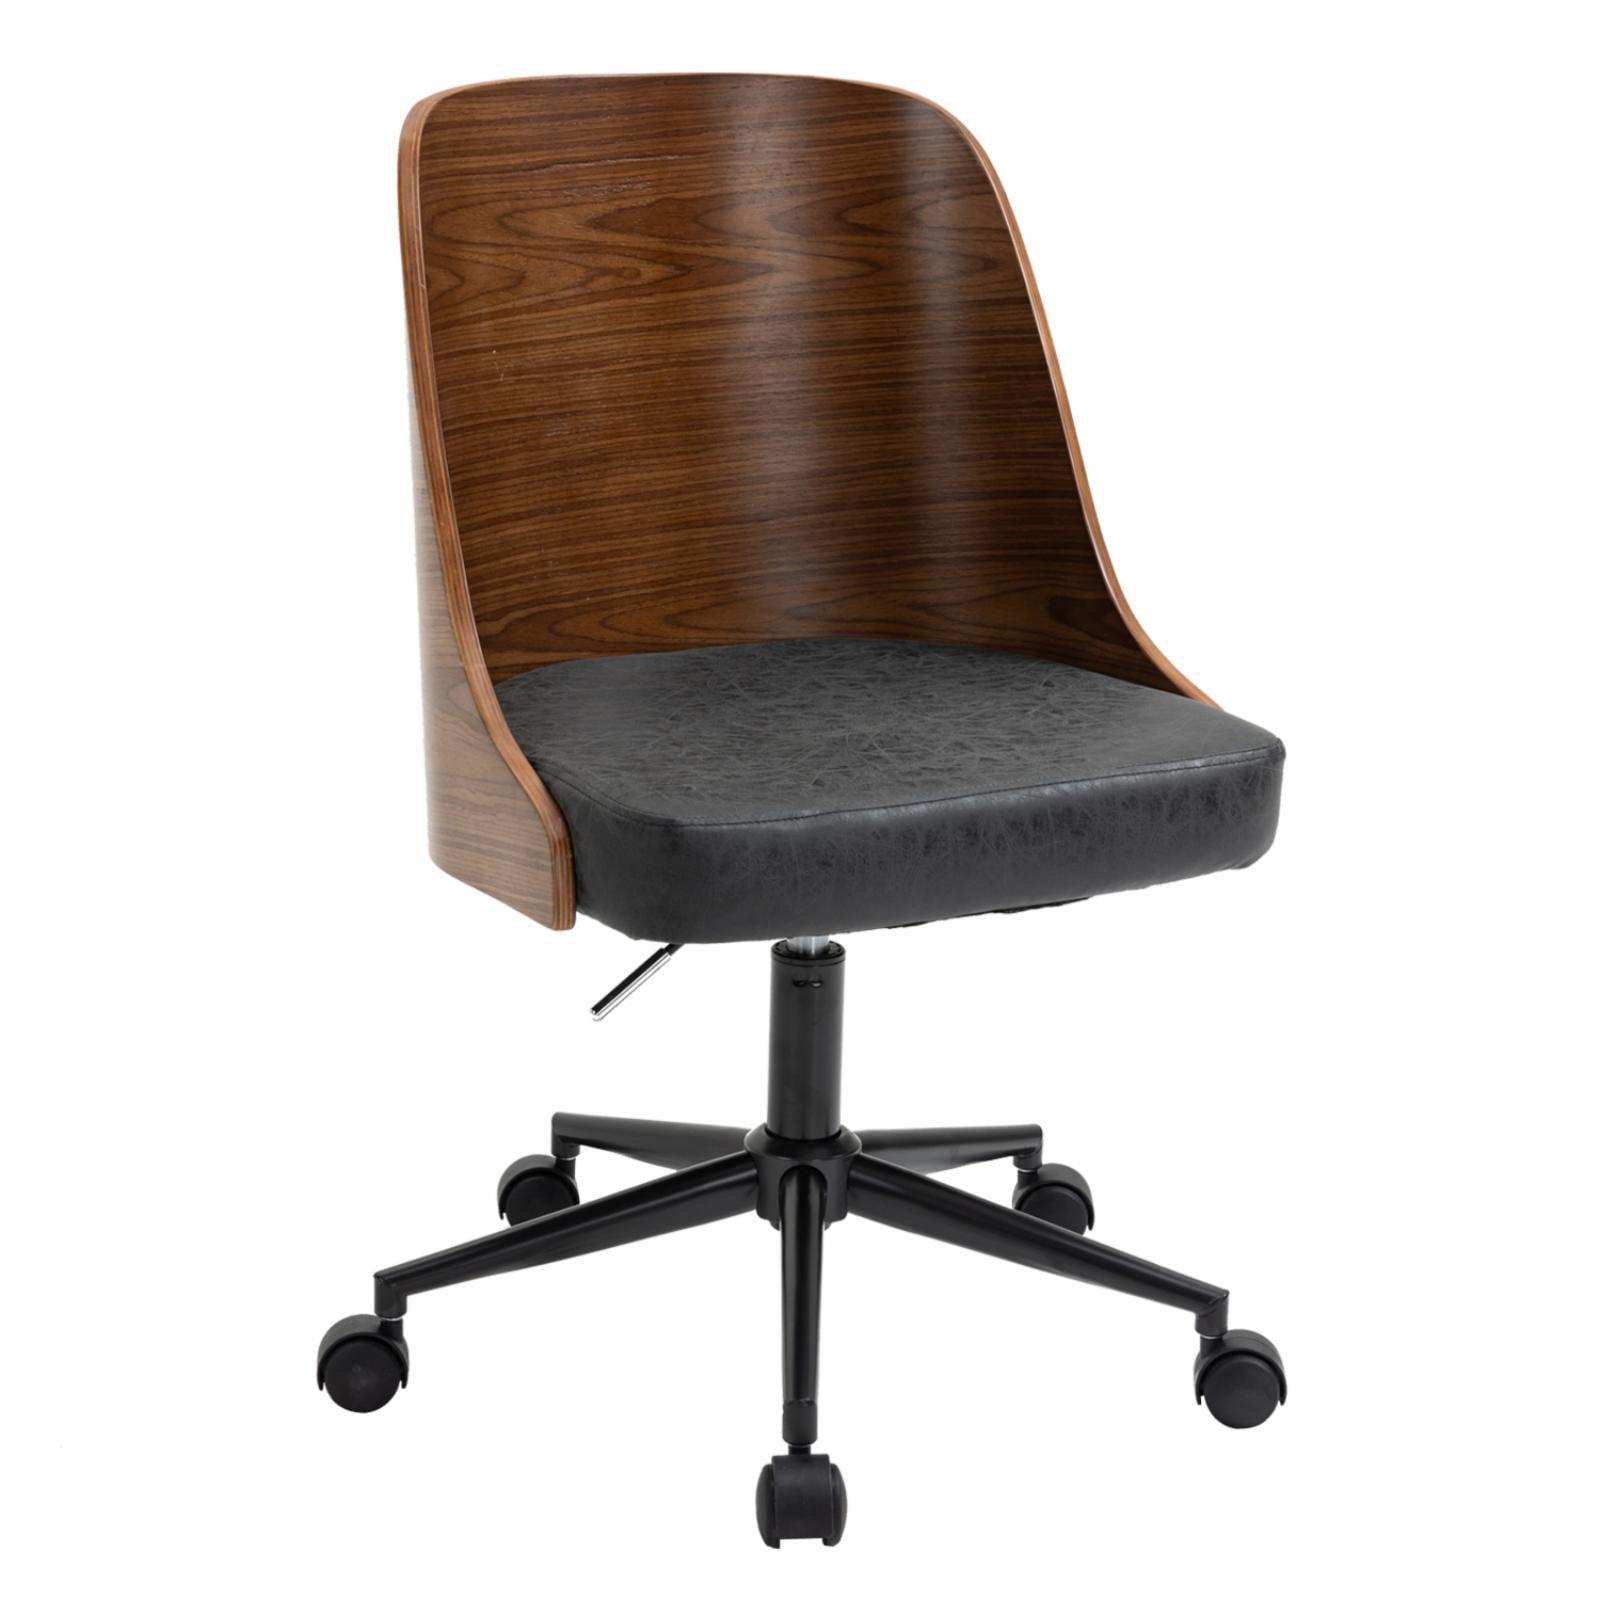 Ergo Comfort Brown Leather and Wood Swivel Executive Chair